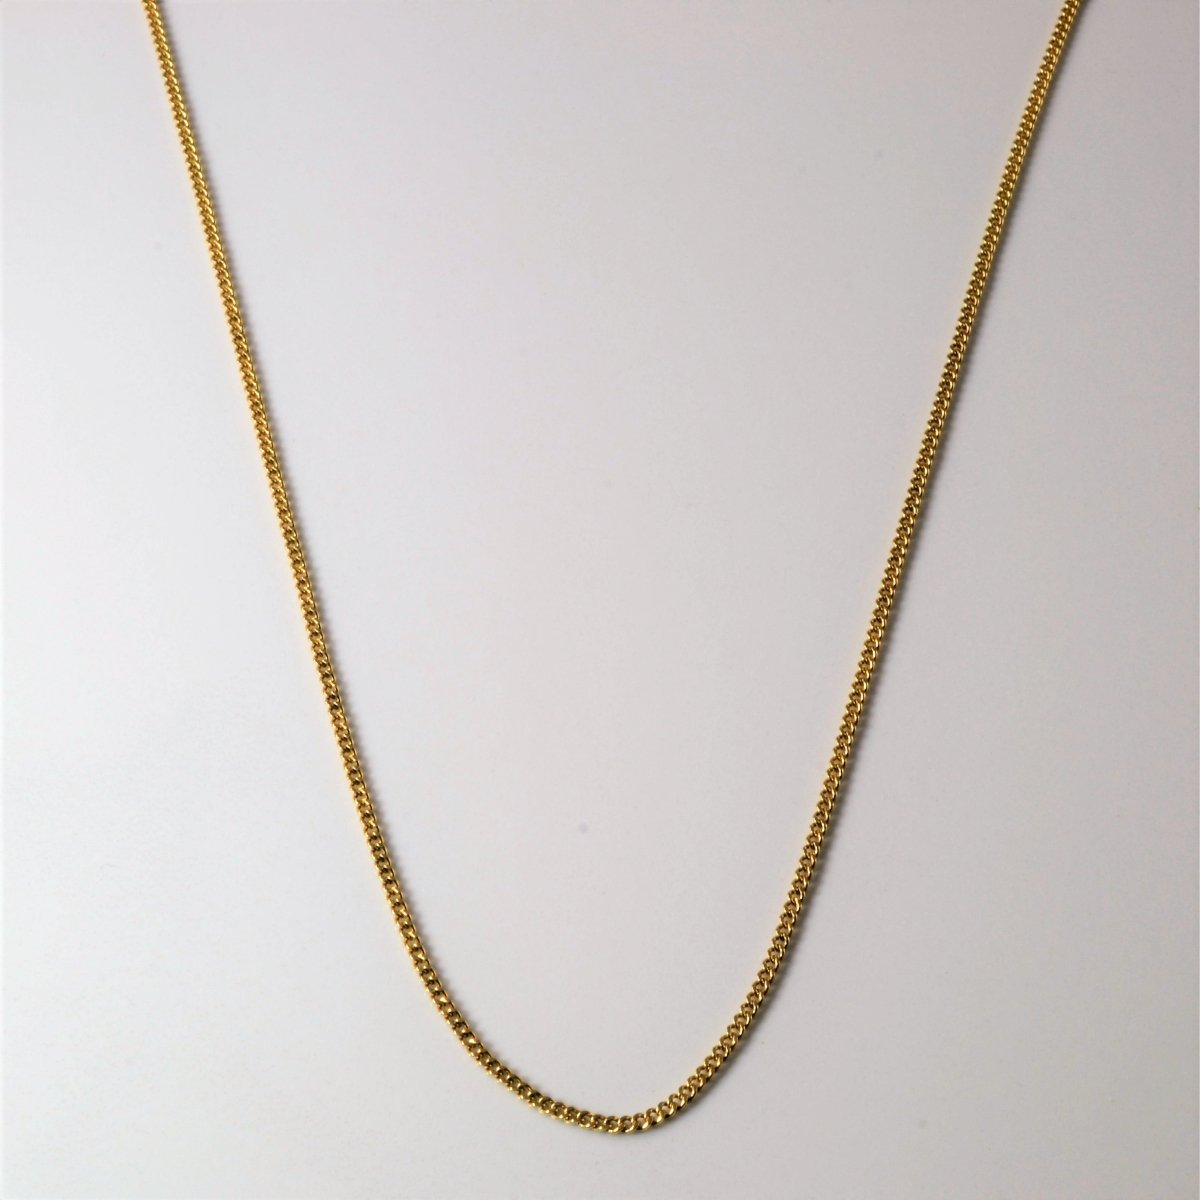 10k Yellow Gold Cable Link Chain | 16